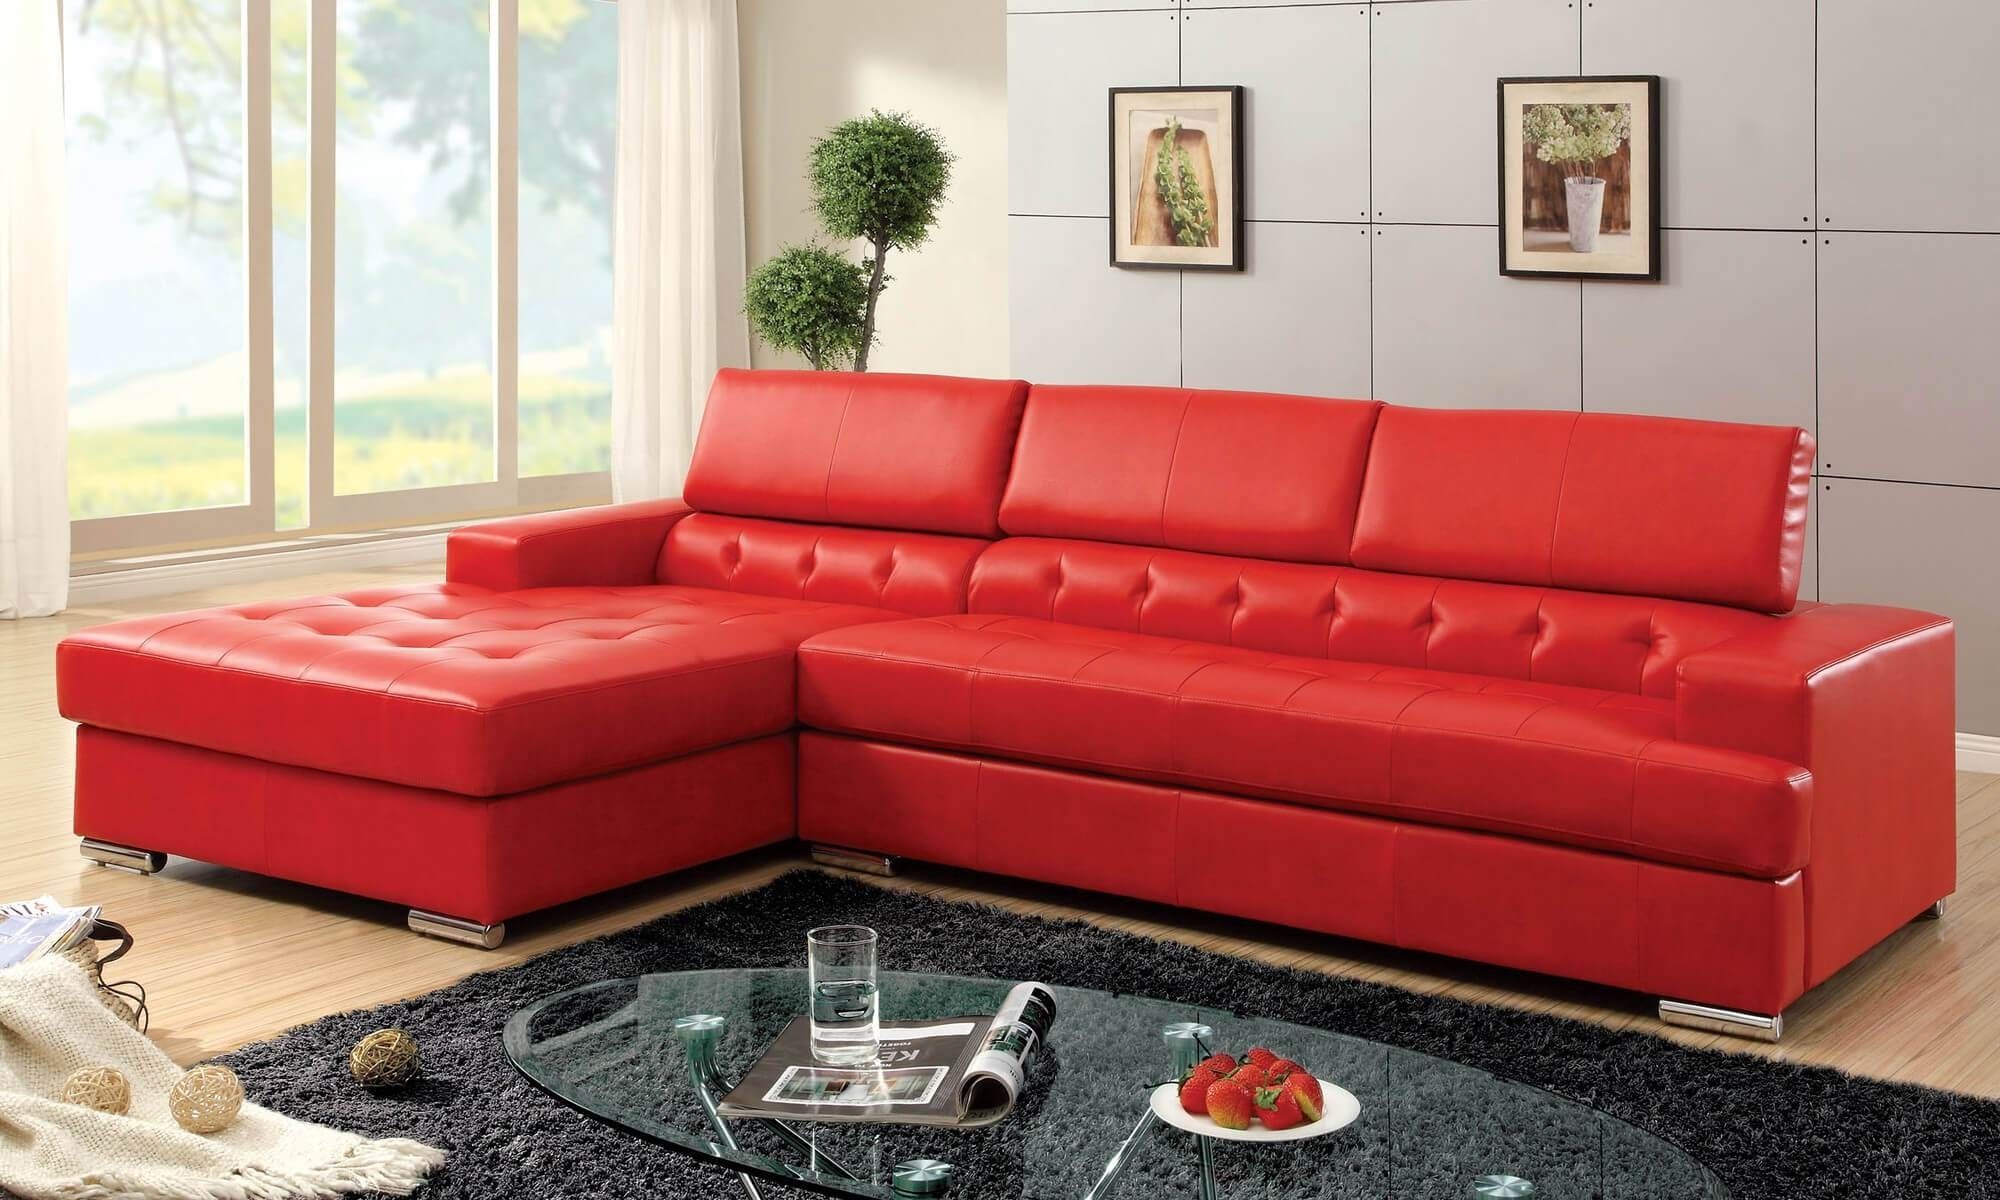 Awesome Cheap Red Leather Sofa Plan All About Home Design Jmhafencom Throughout Red Leather Sofas (Photo 15 of 15)